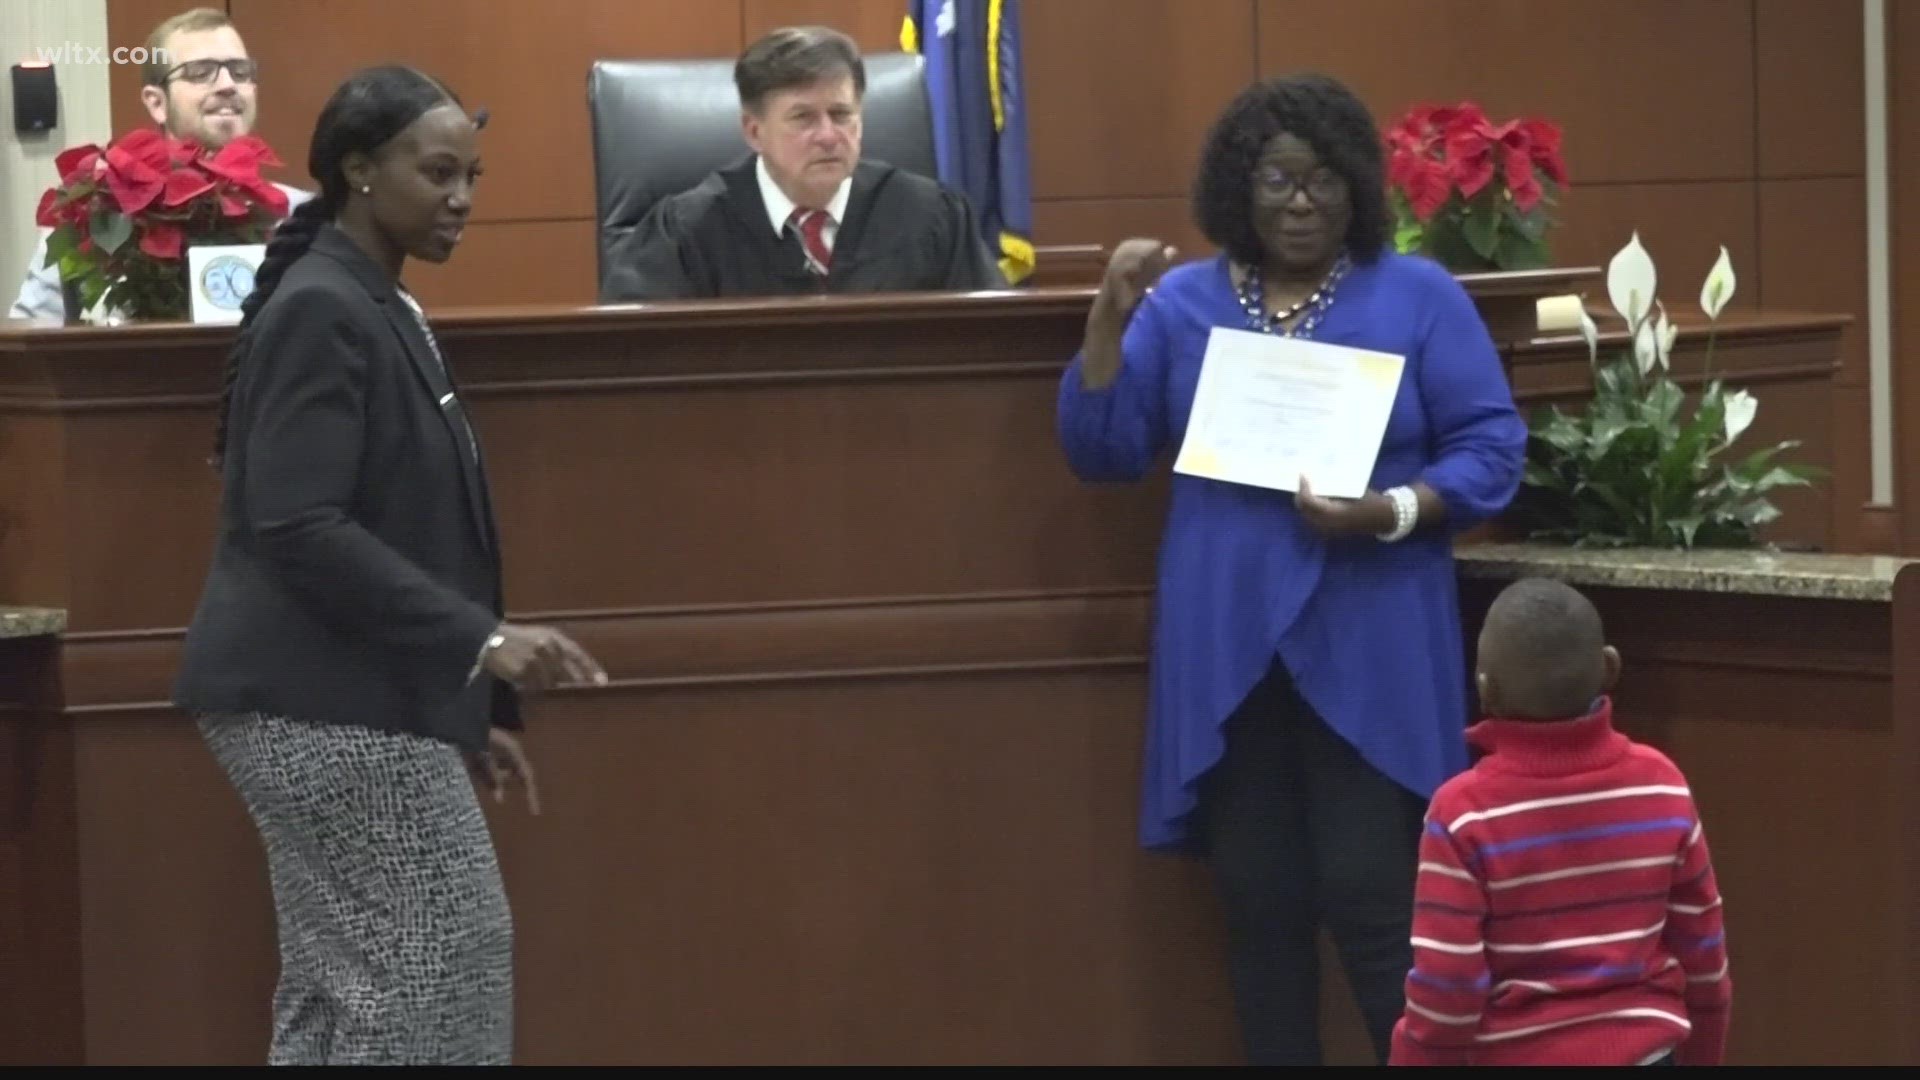 A lot of cheering could be heard from Sumter family courtrooms today.